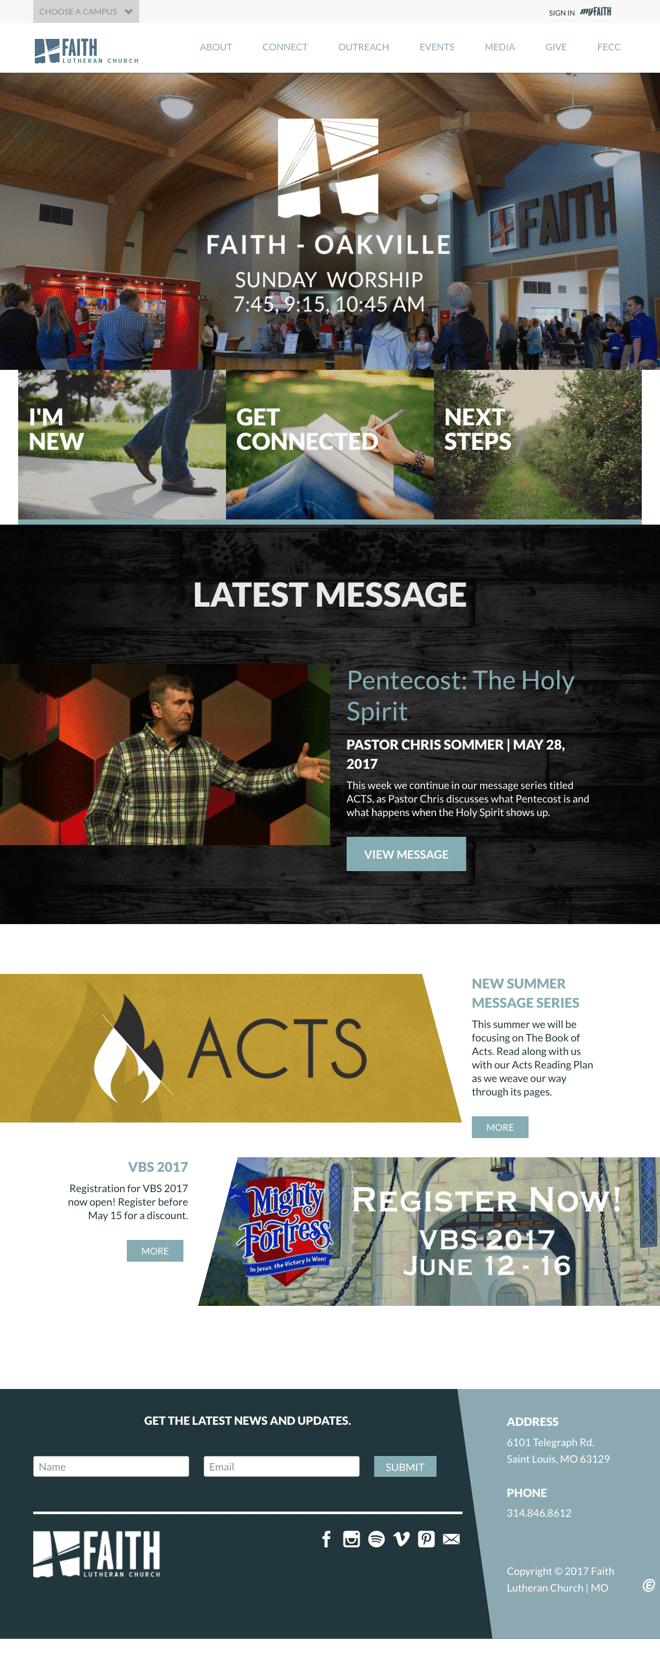 6-awesome-multi-site-church-websites-for-inspiration-faithlutheran.png